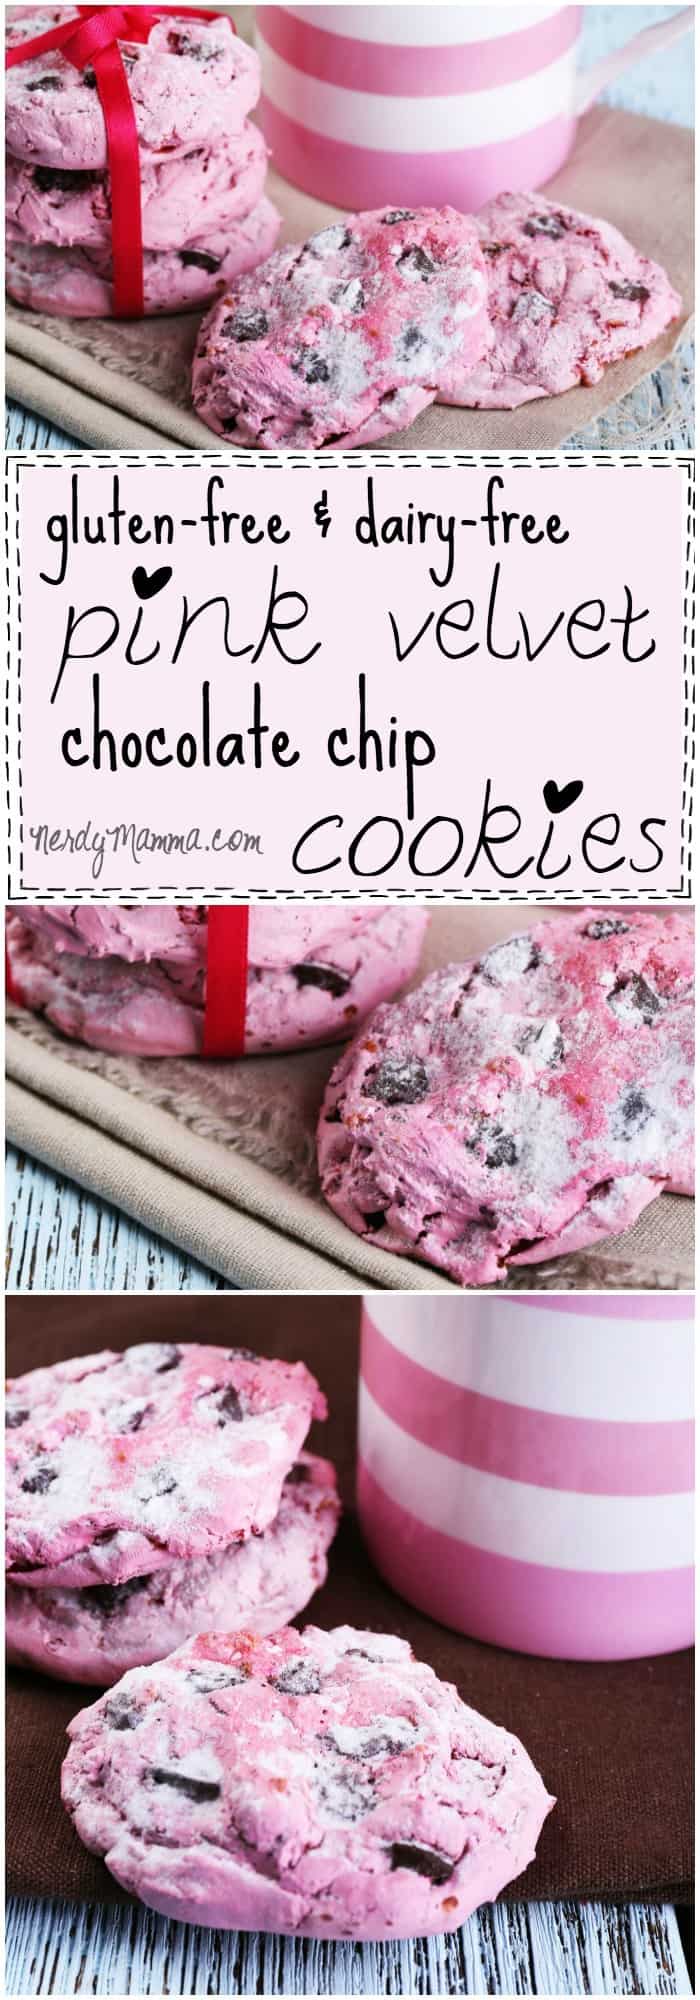 These gluten-free and dairy-free pink velvet chocolate chip cookies are so pretty. And they sound so yummy. I want a batch now.